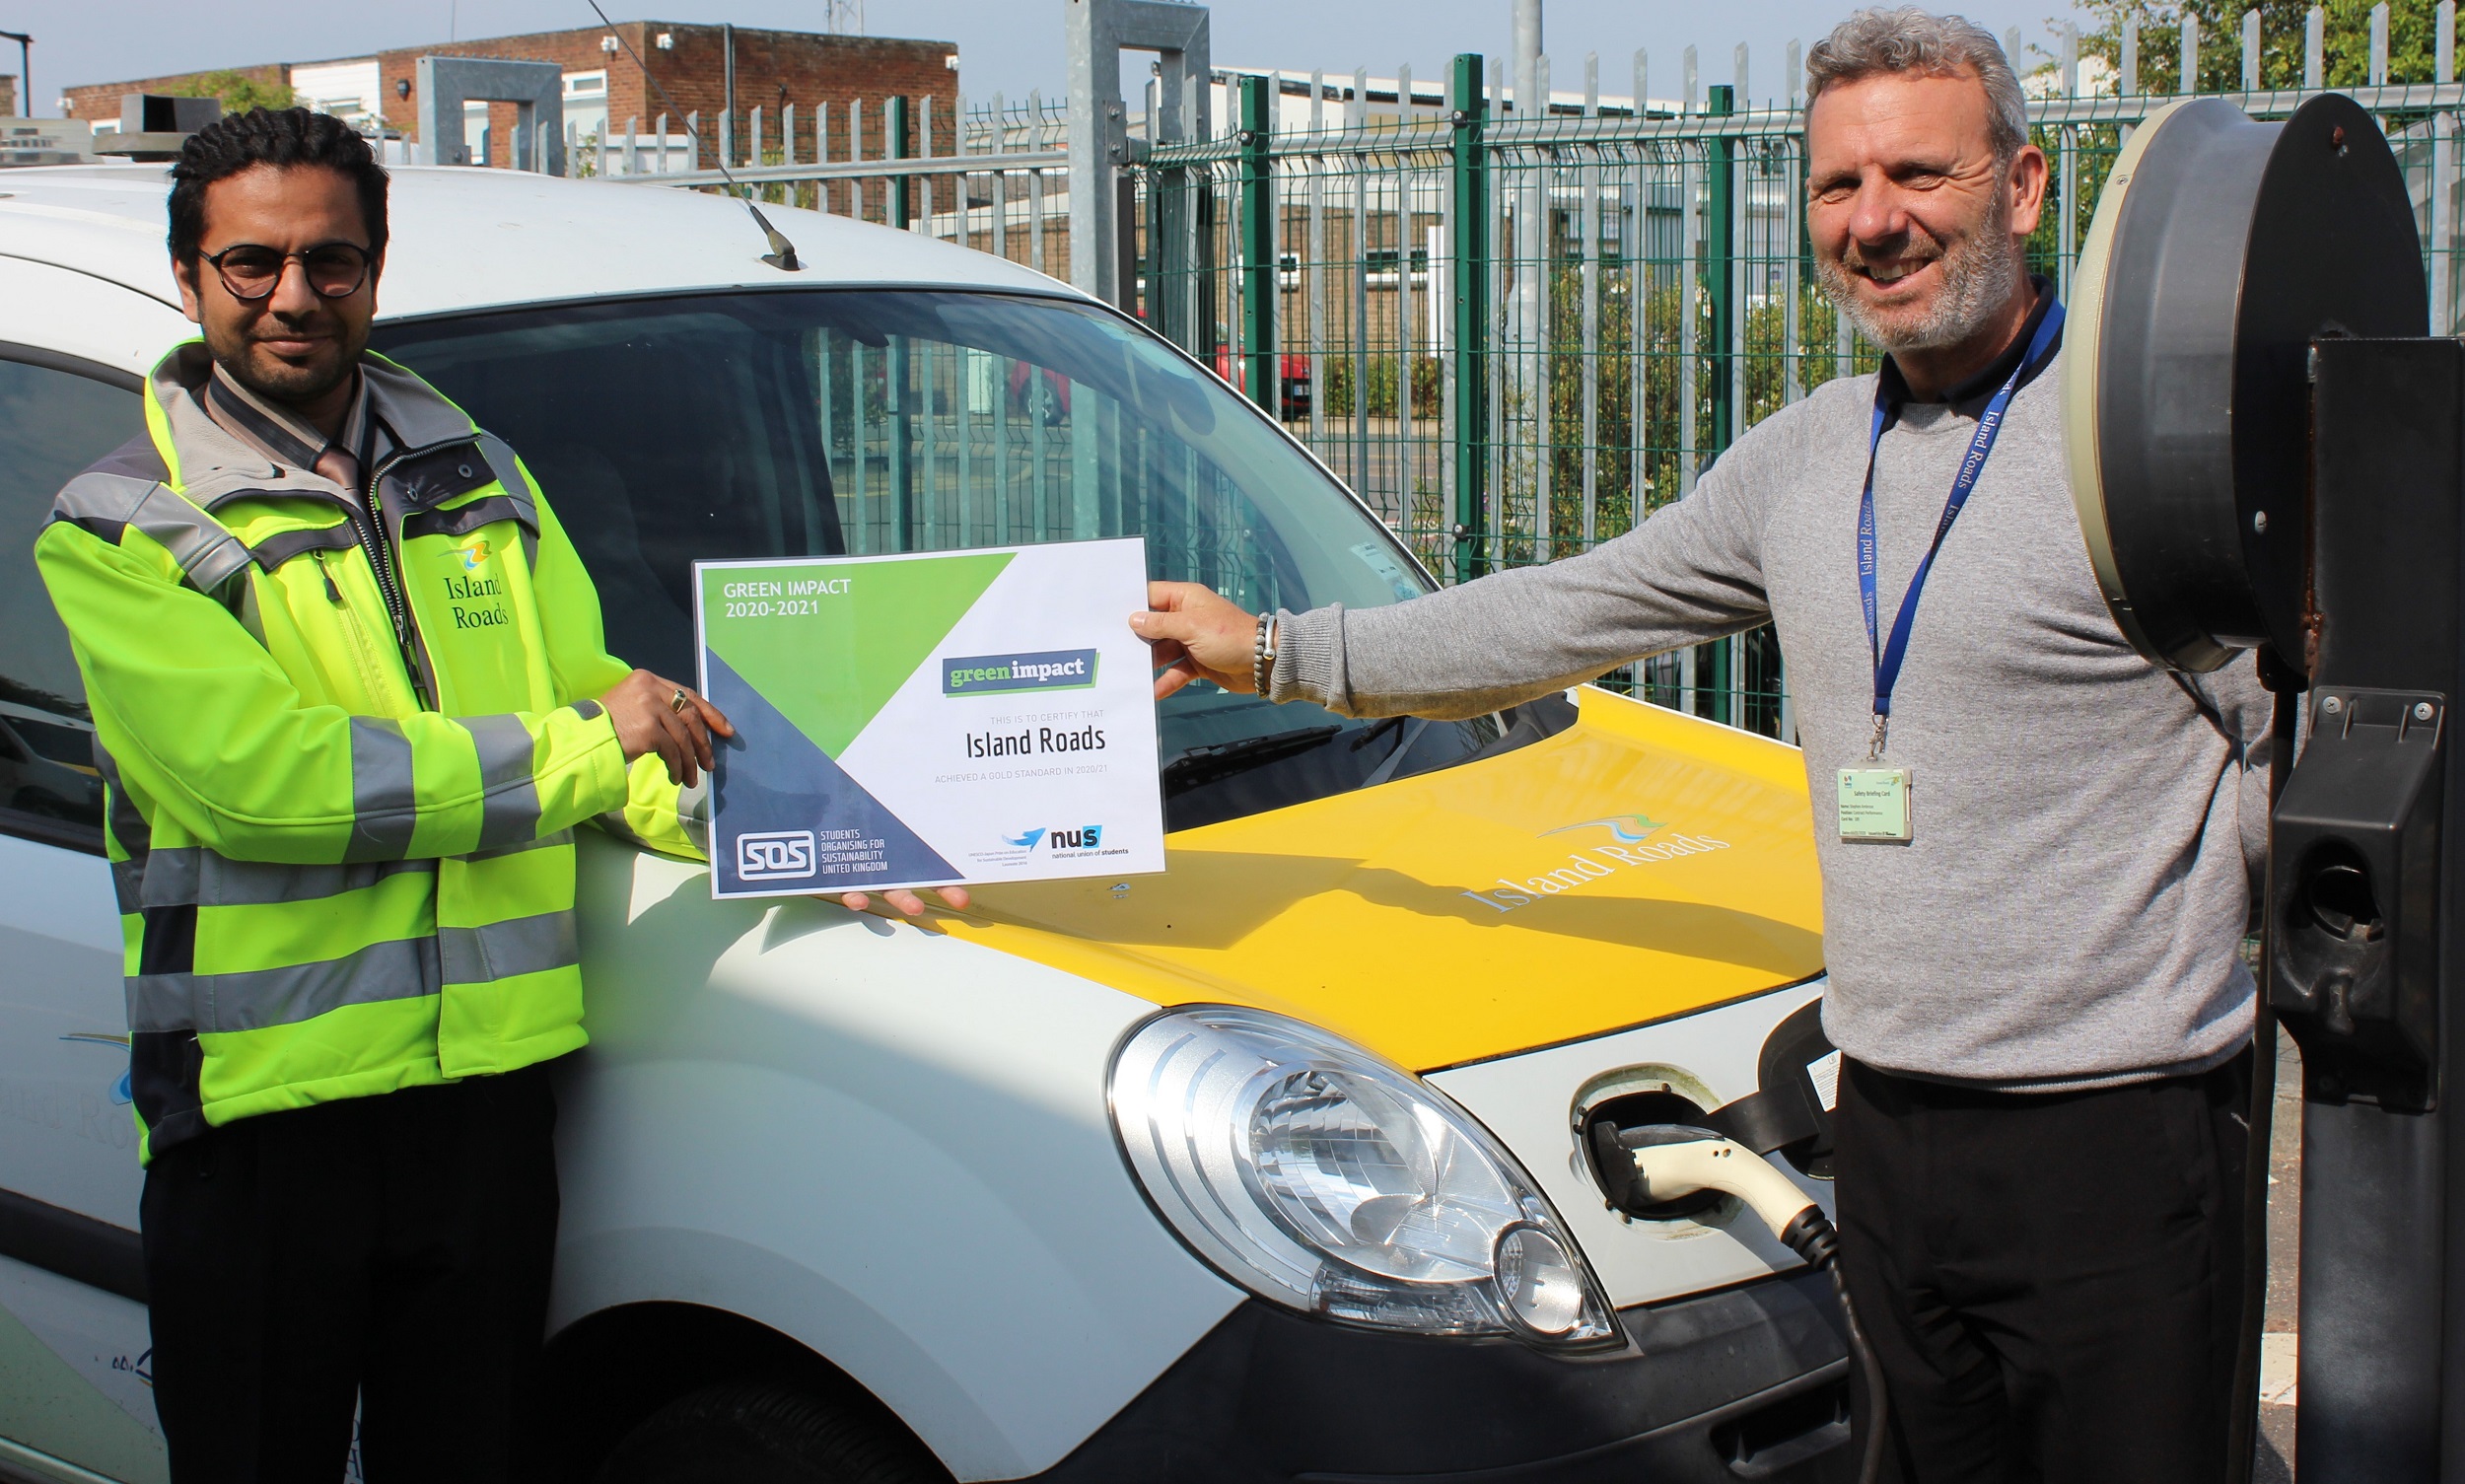 Nick Bhatnagar and Stephen Ambrose standing alongside an Island Roads electric vehicle holding the Green Impact gold award certificate